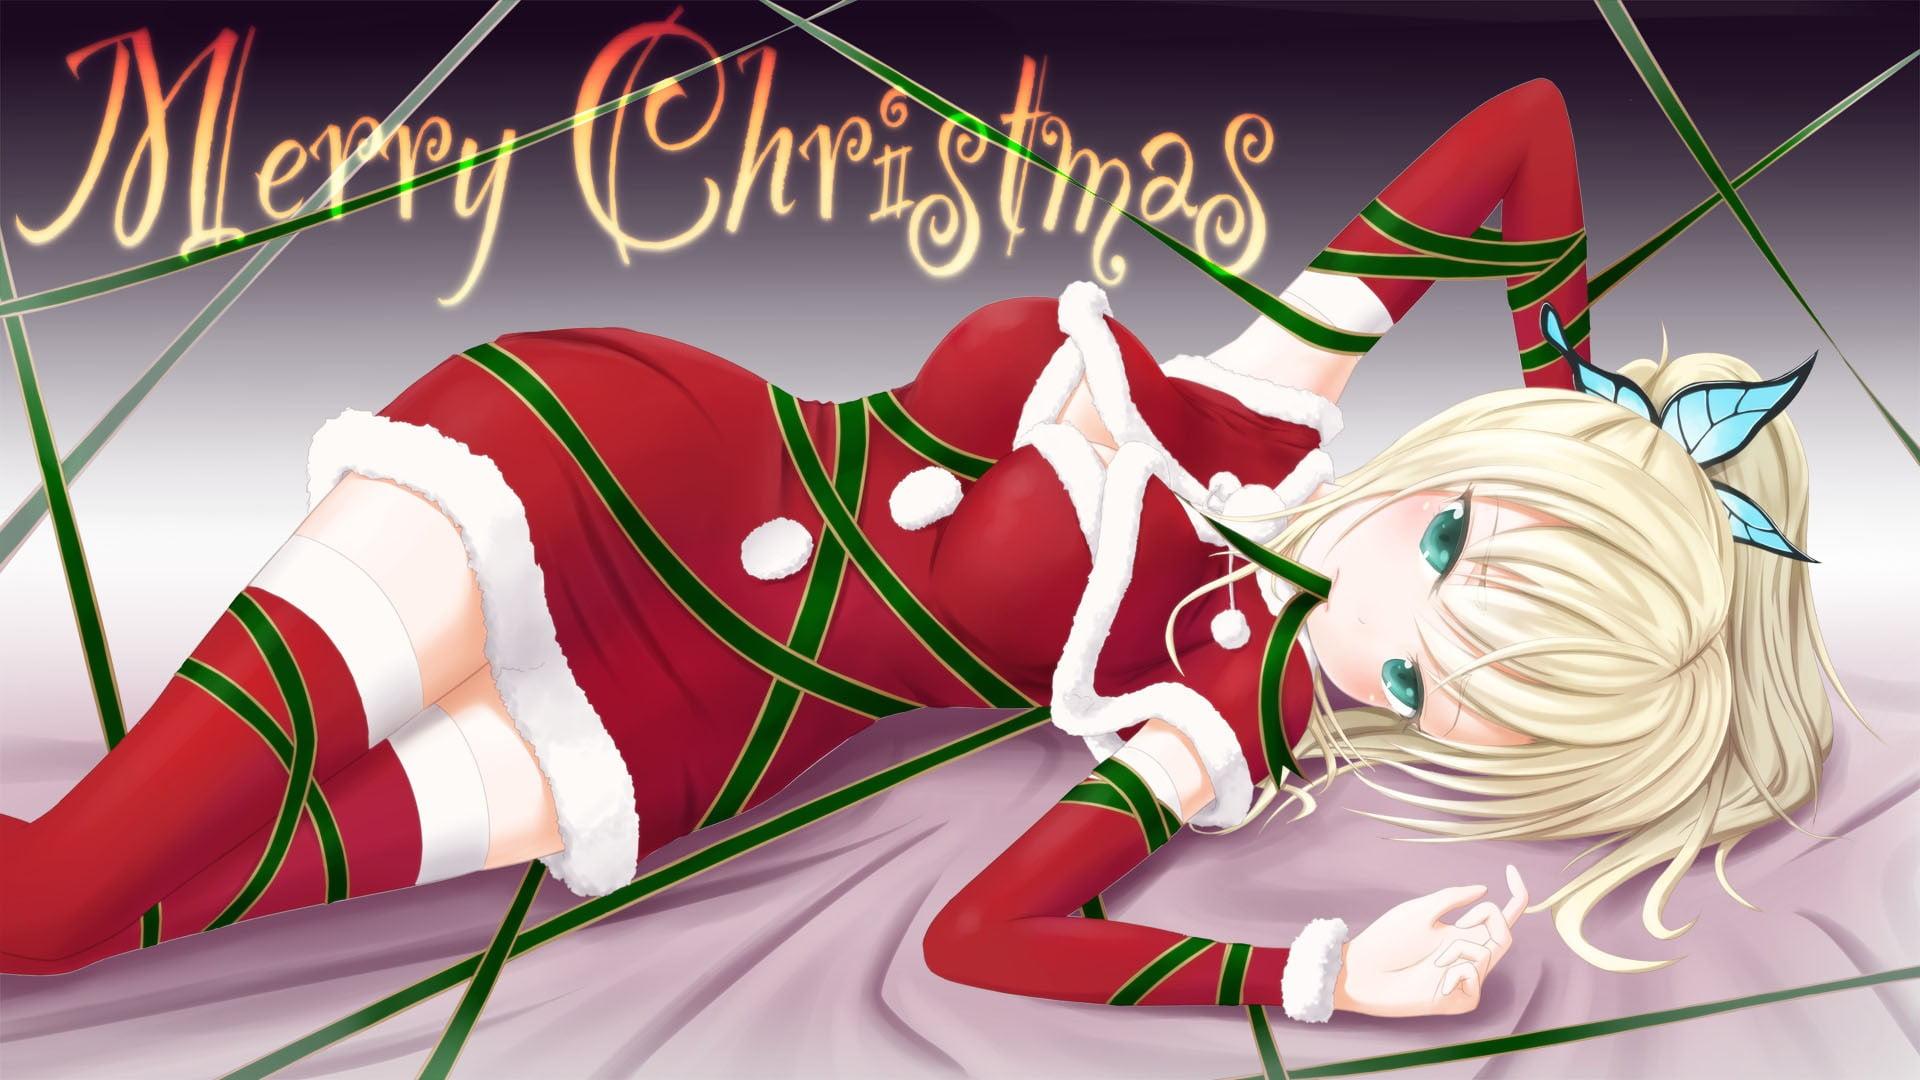 Female anime character illustration with merry Christmas